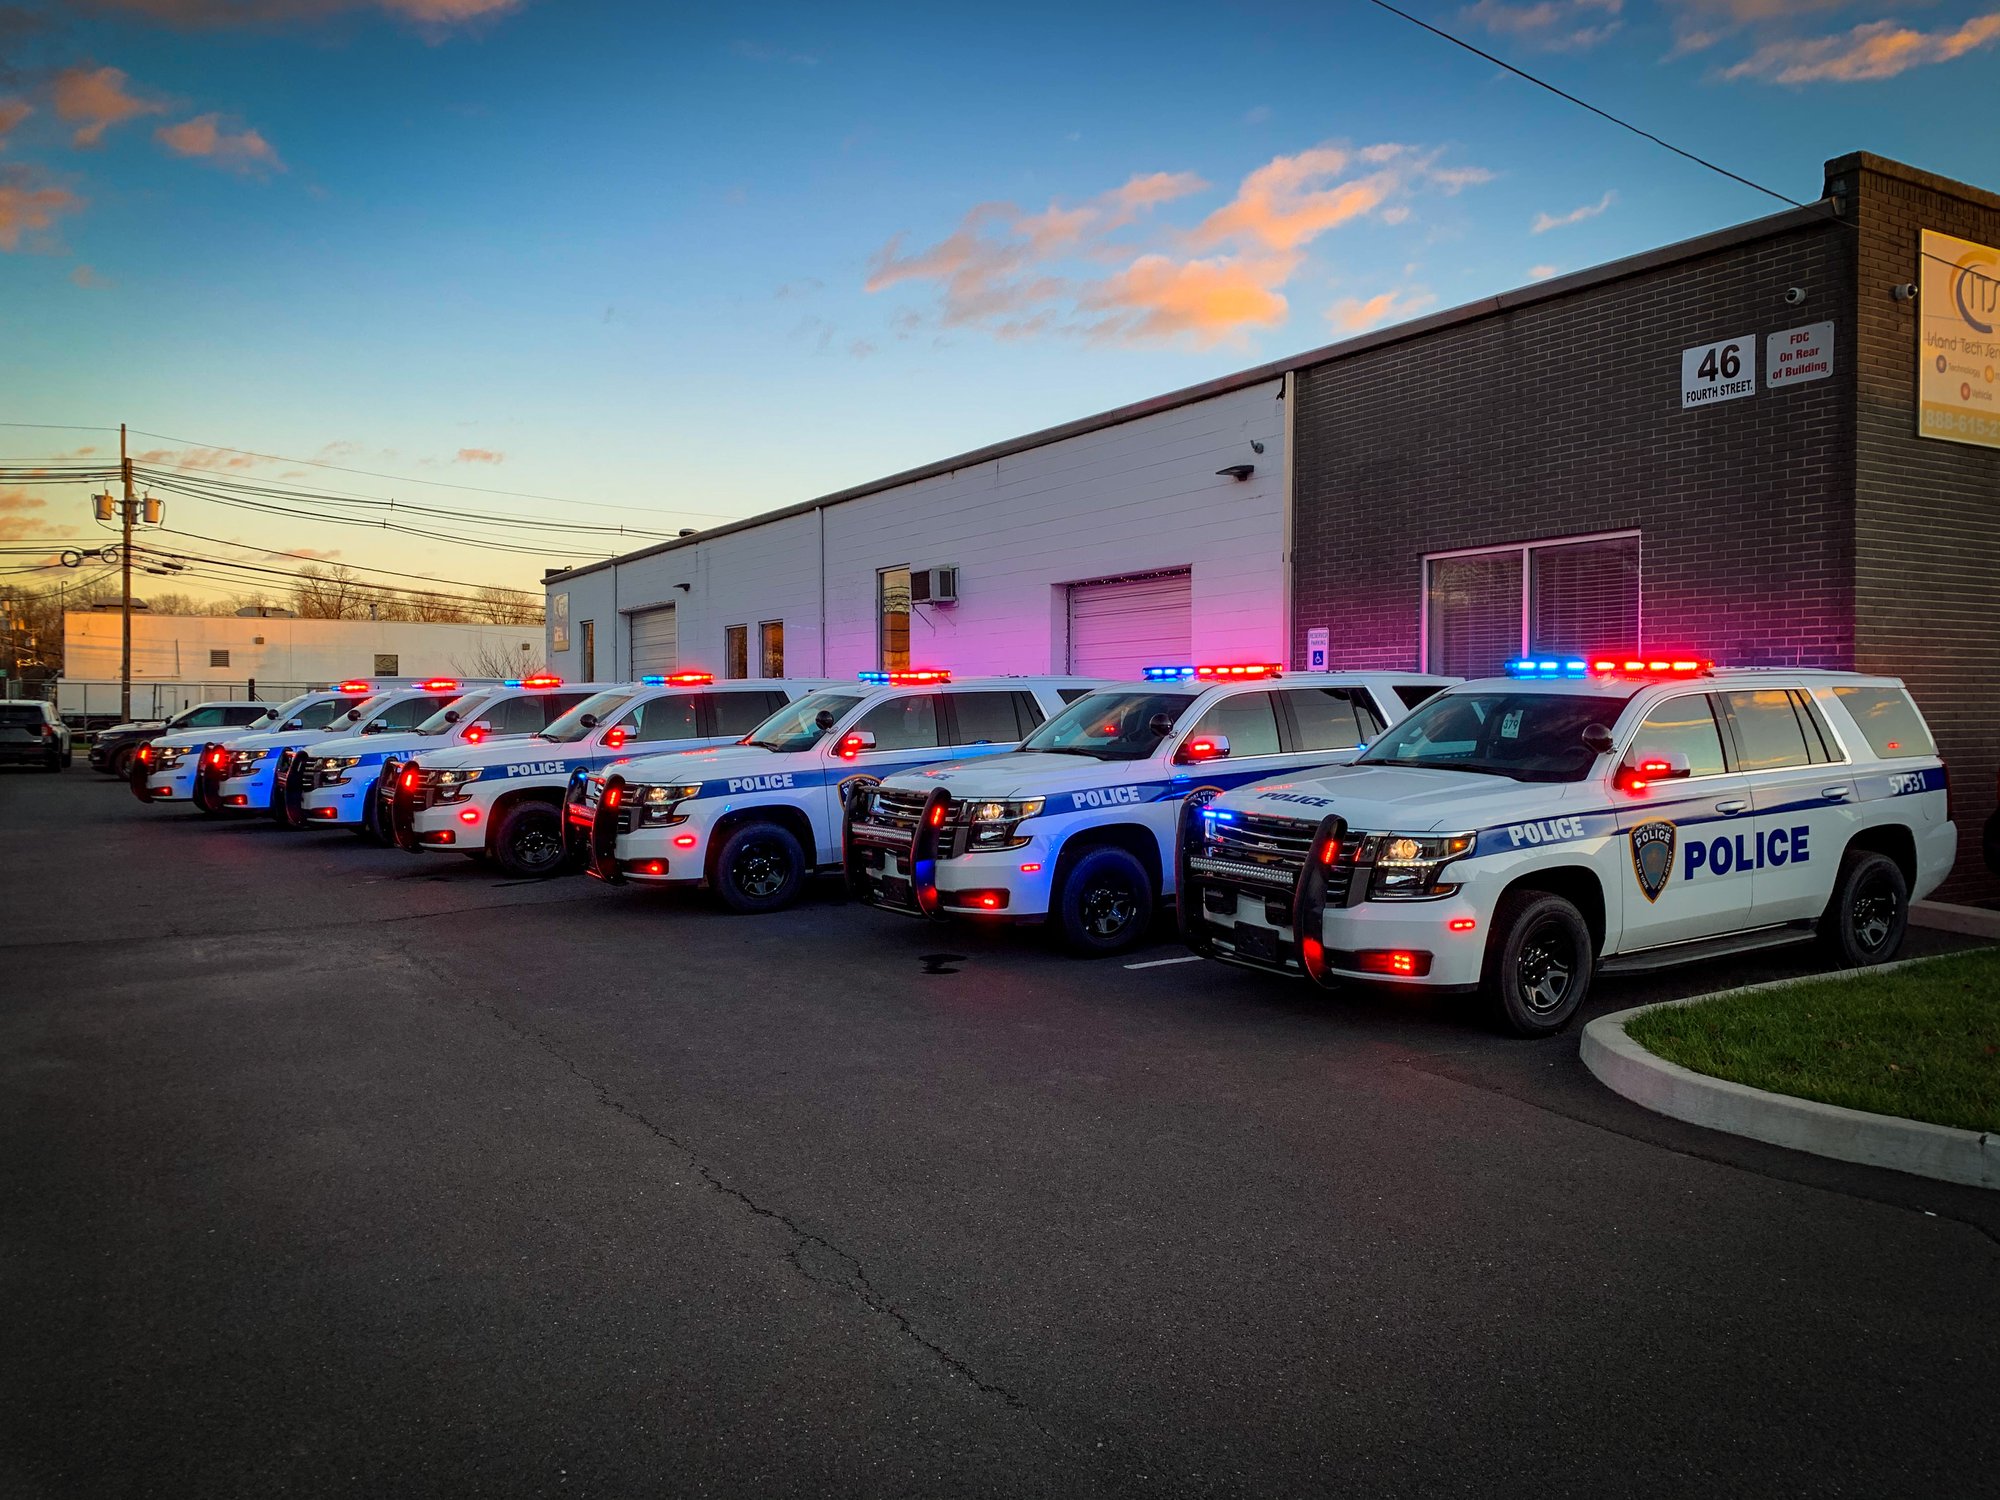 row of fully lit police vehicles in parking lot